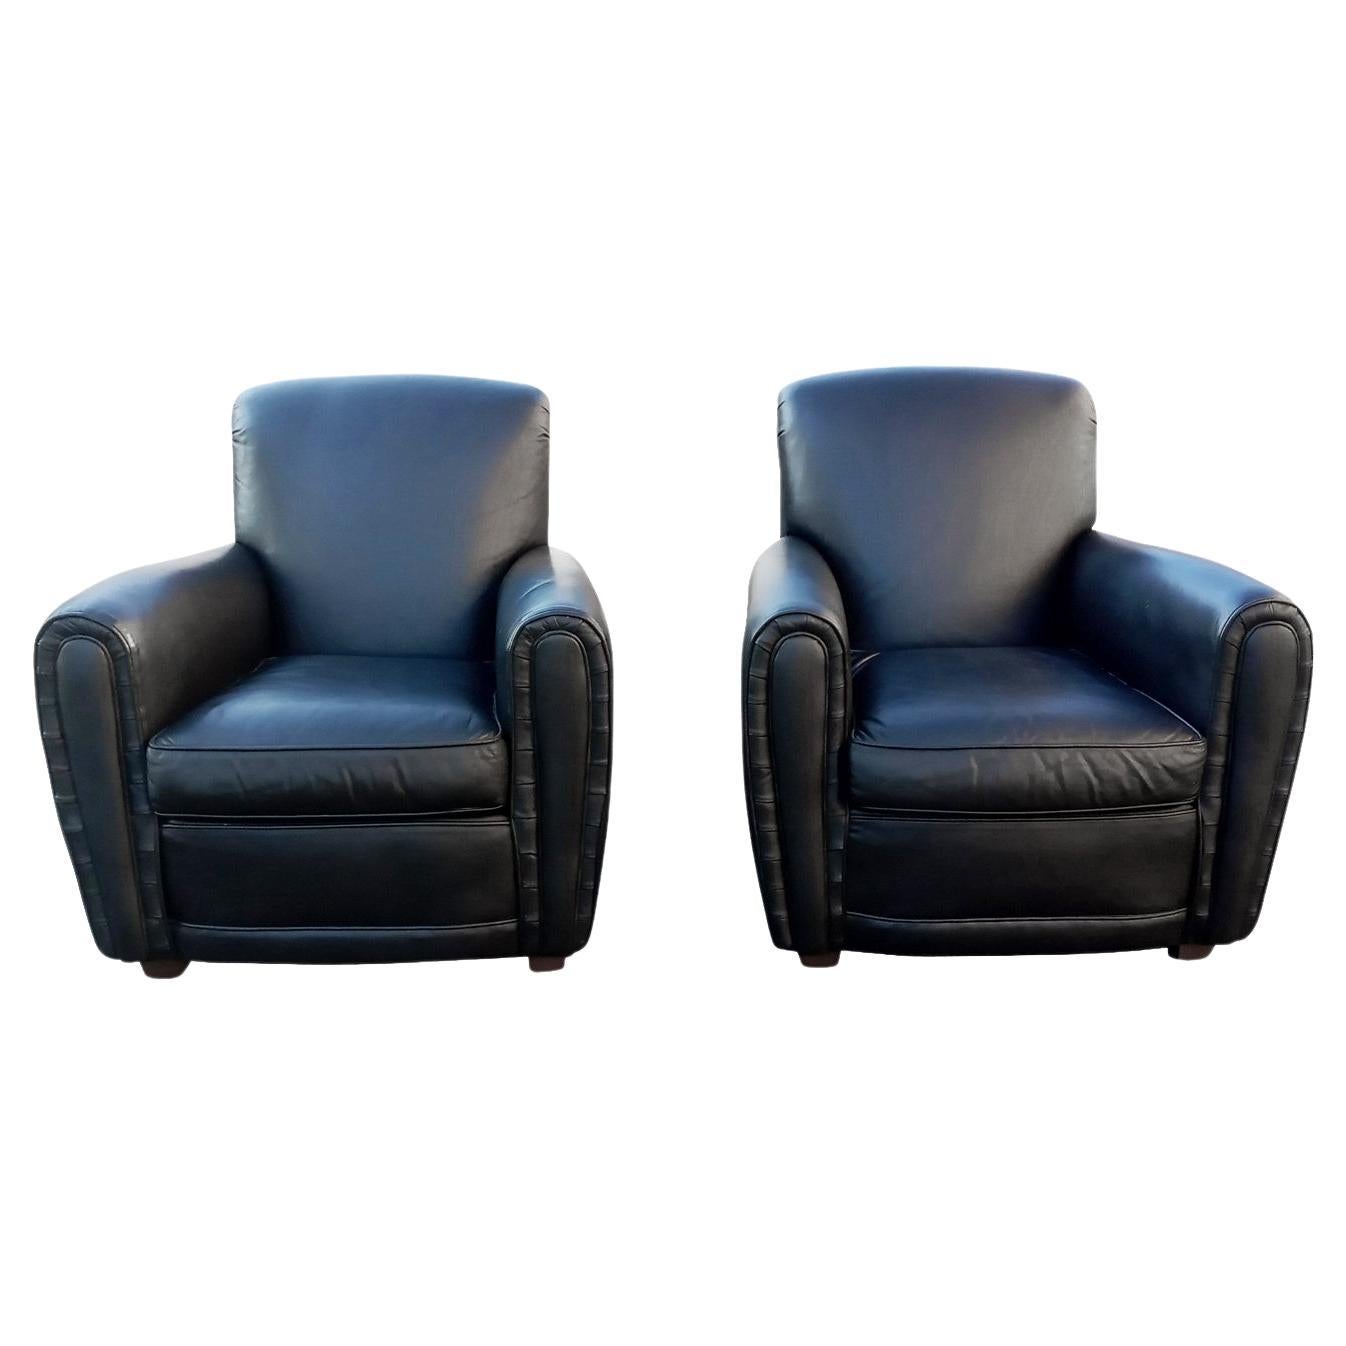 Drexel Heritage Art Deco Inspired Pair of Black Leather Club or Lounge Chairs